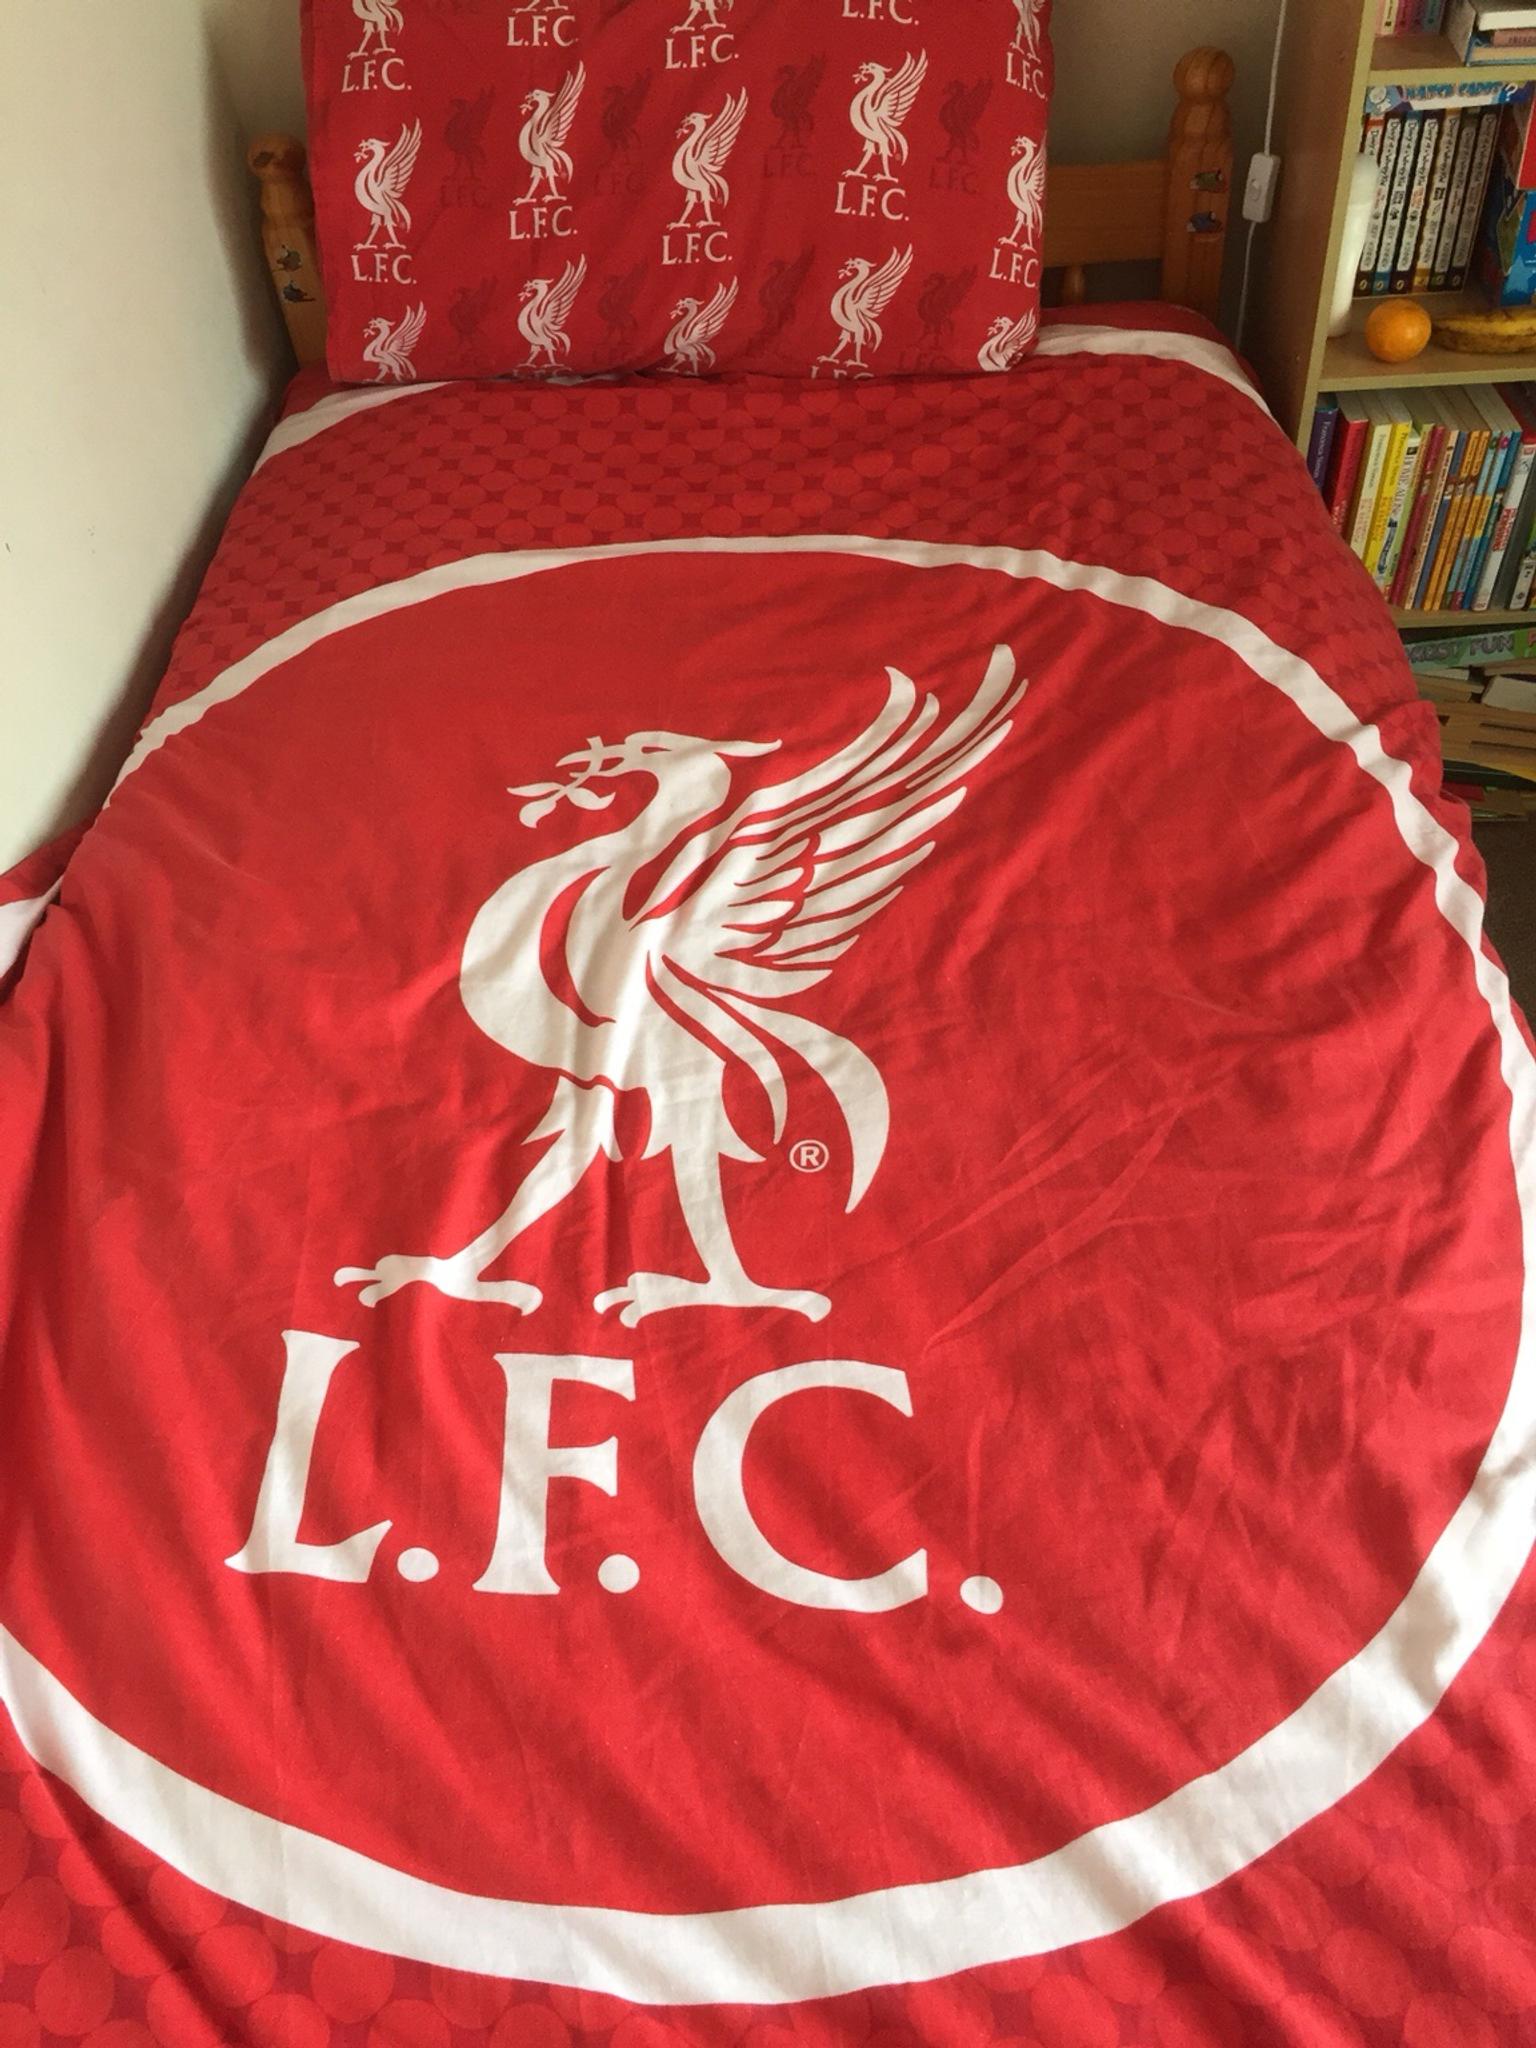 Liverpool Football Bedding In B26 Birmingham For 10 00 For Sale